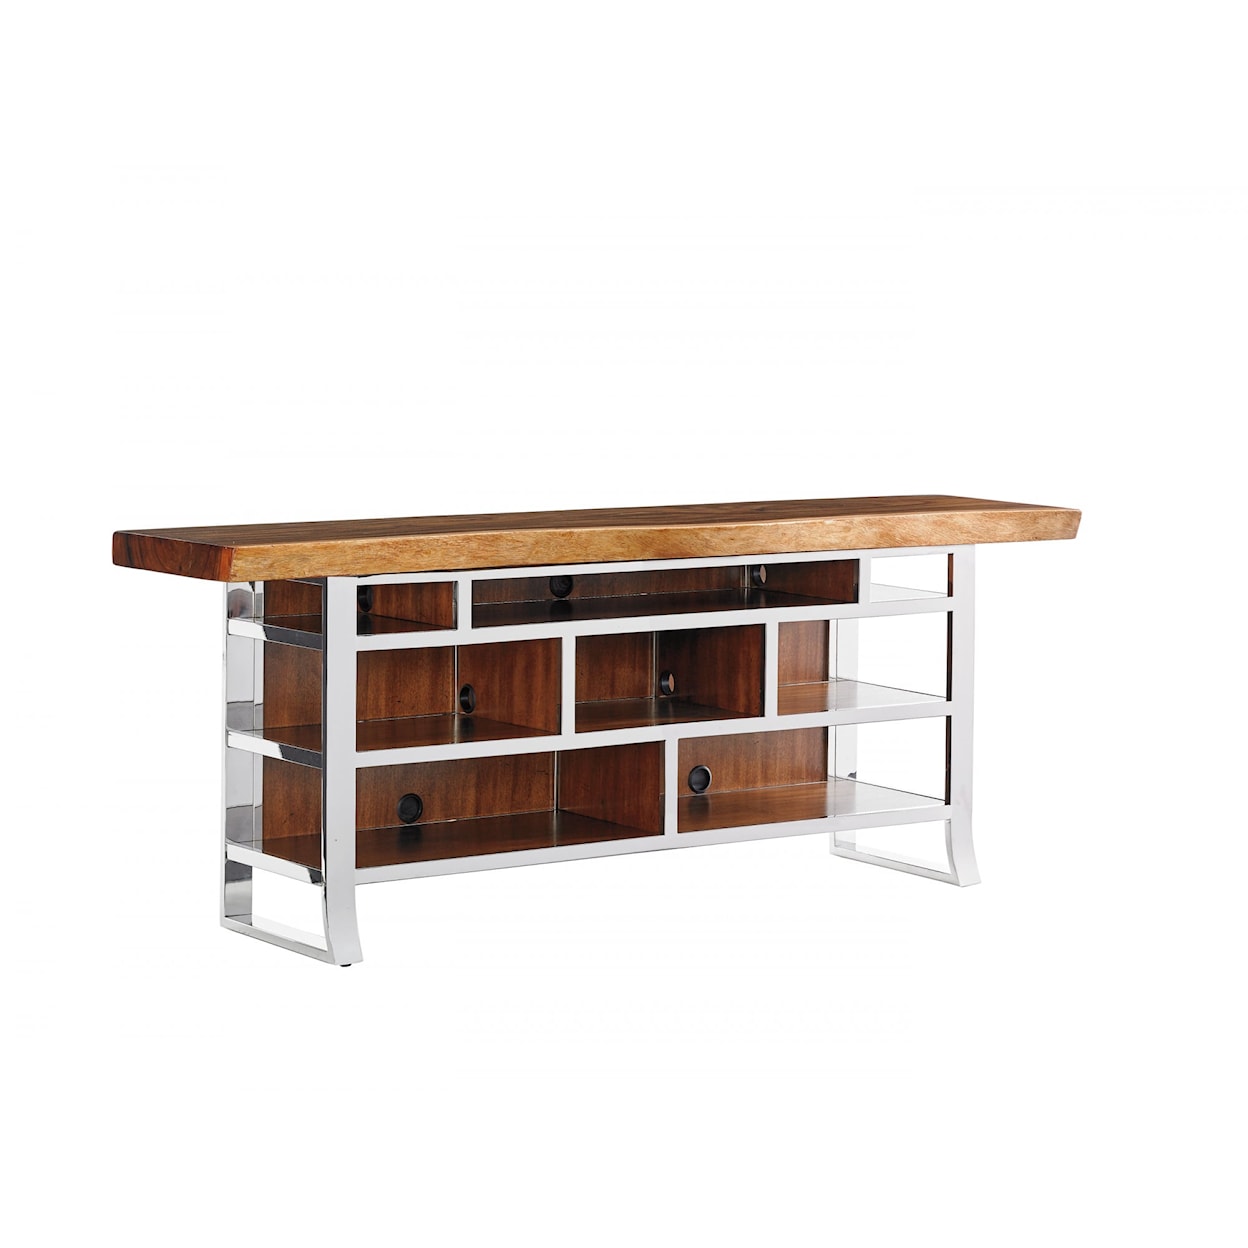 Sligh Studio Designs Media Console with Stainless Steel Base